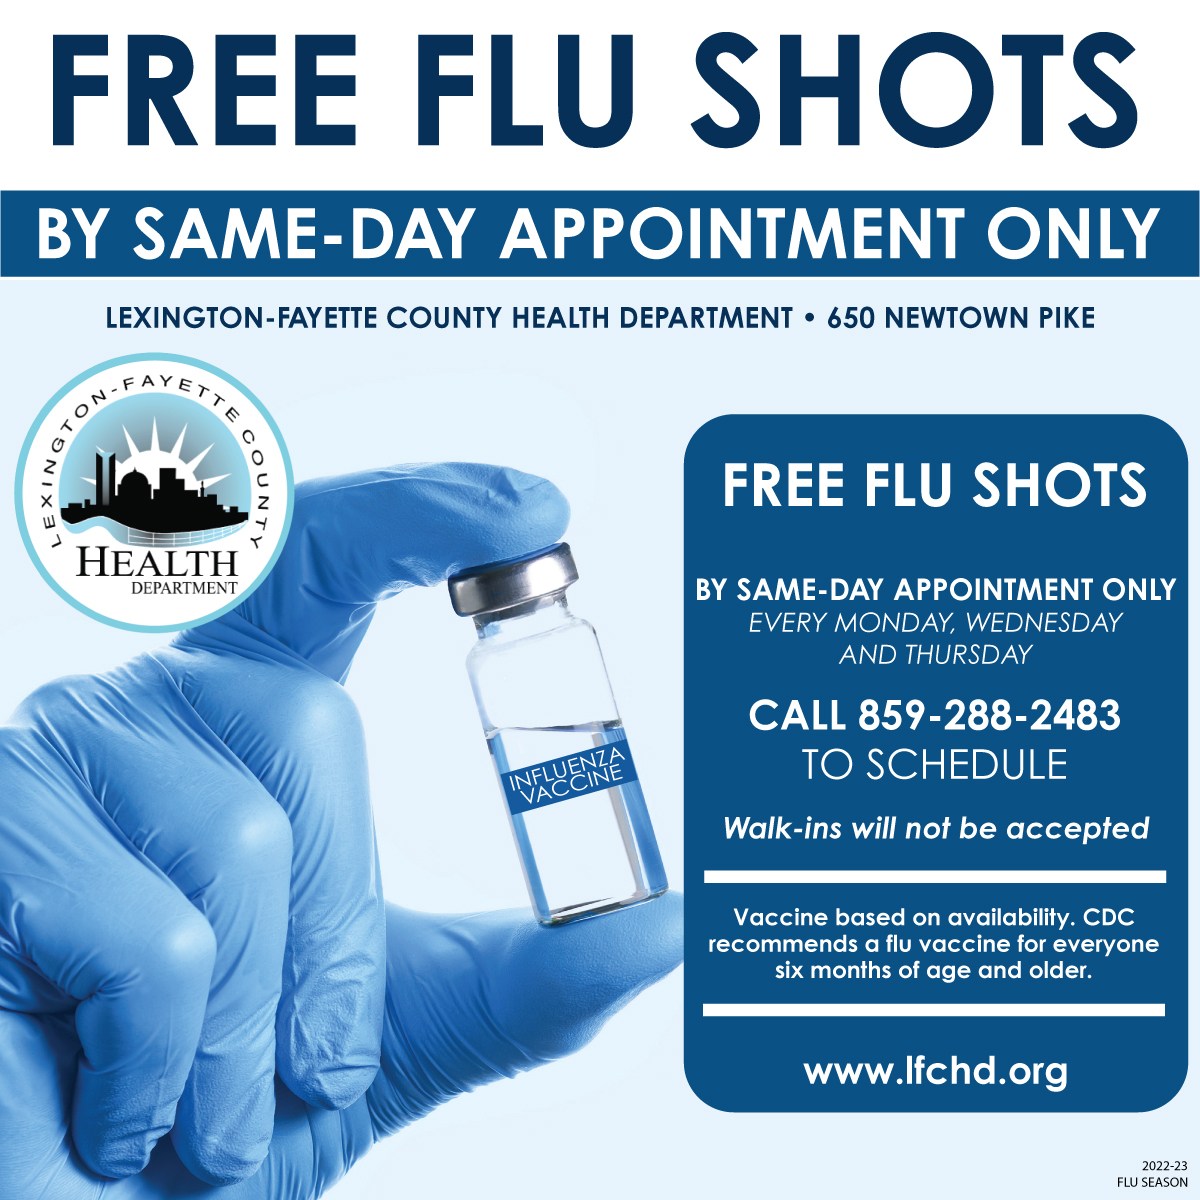 Free flu shots available by same-day appointment in Public Health Clinic